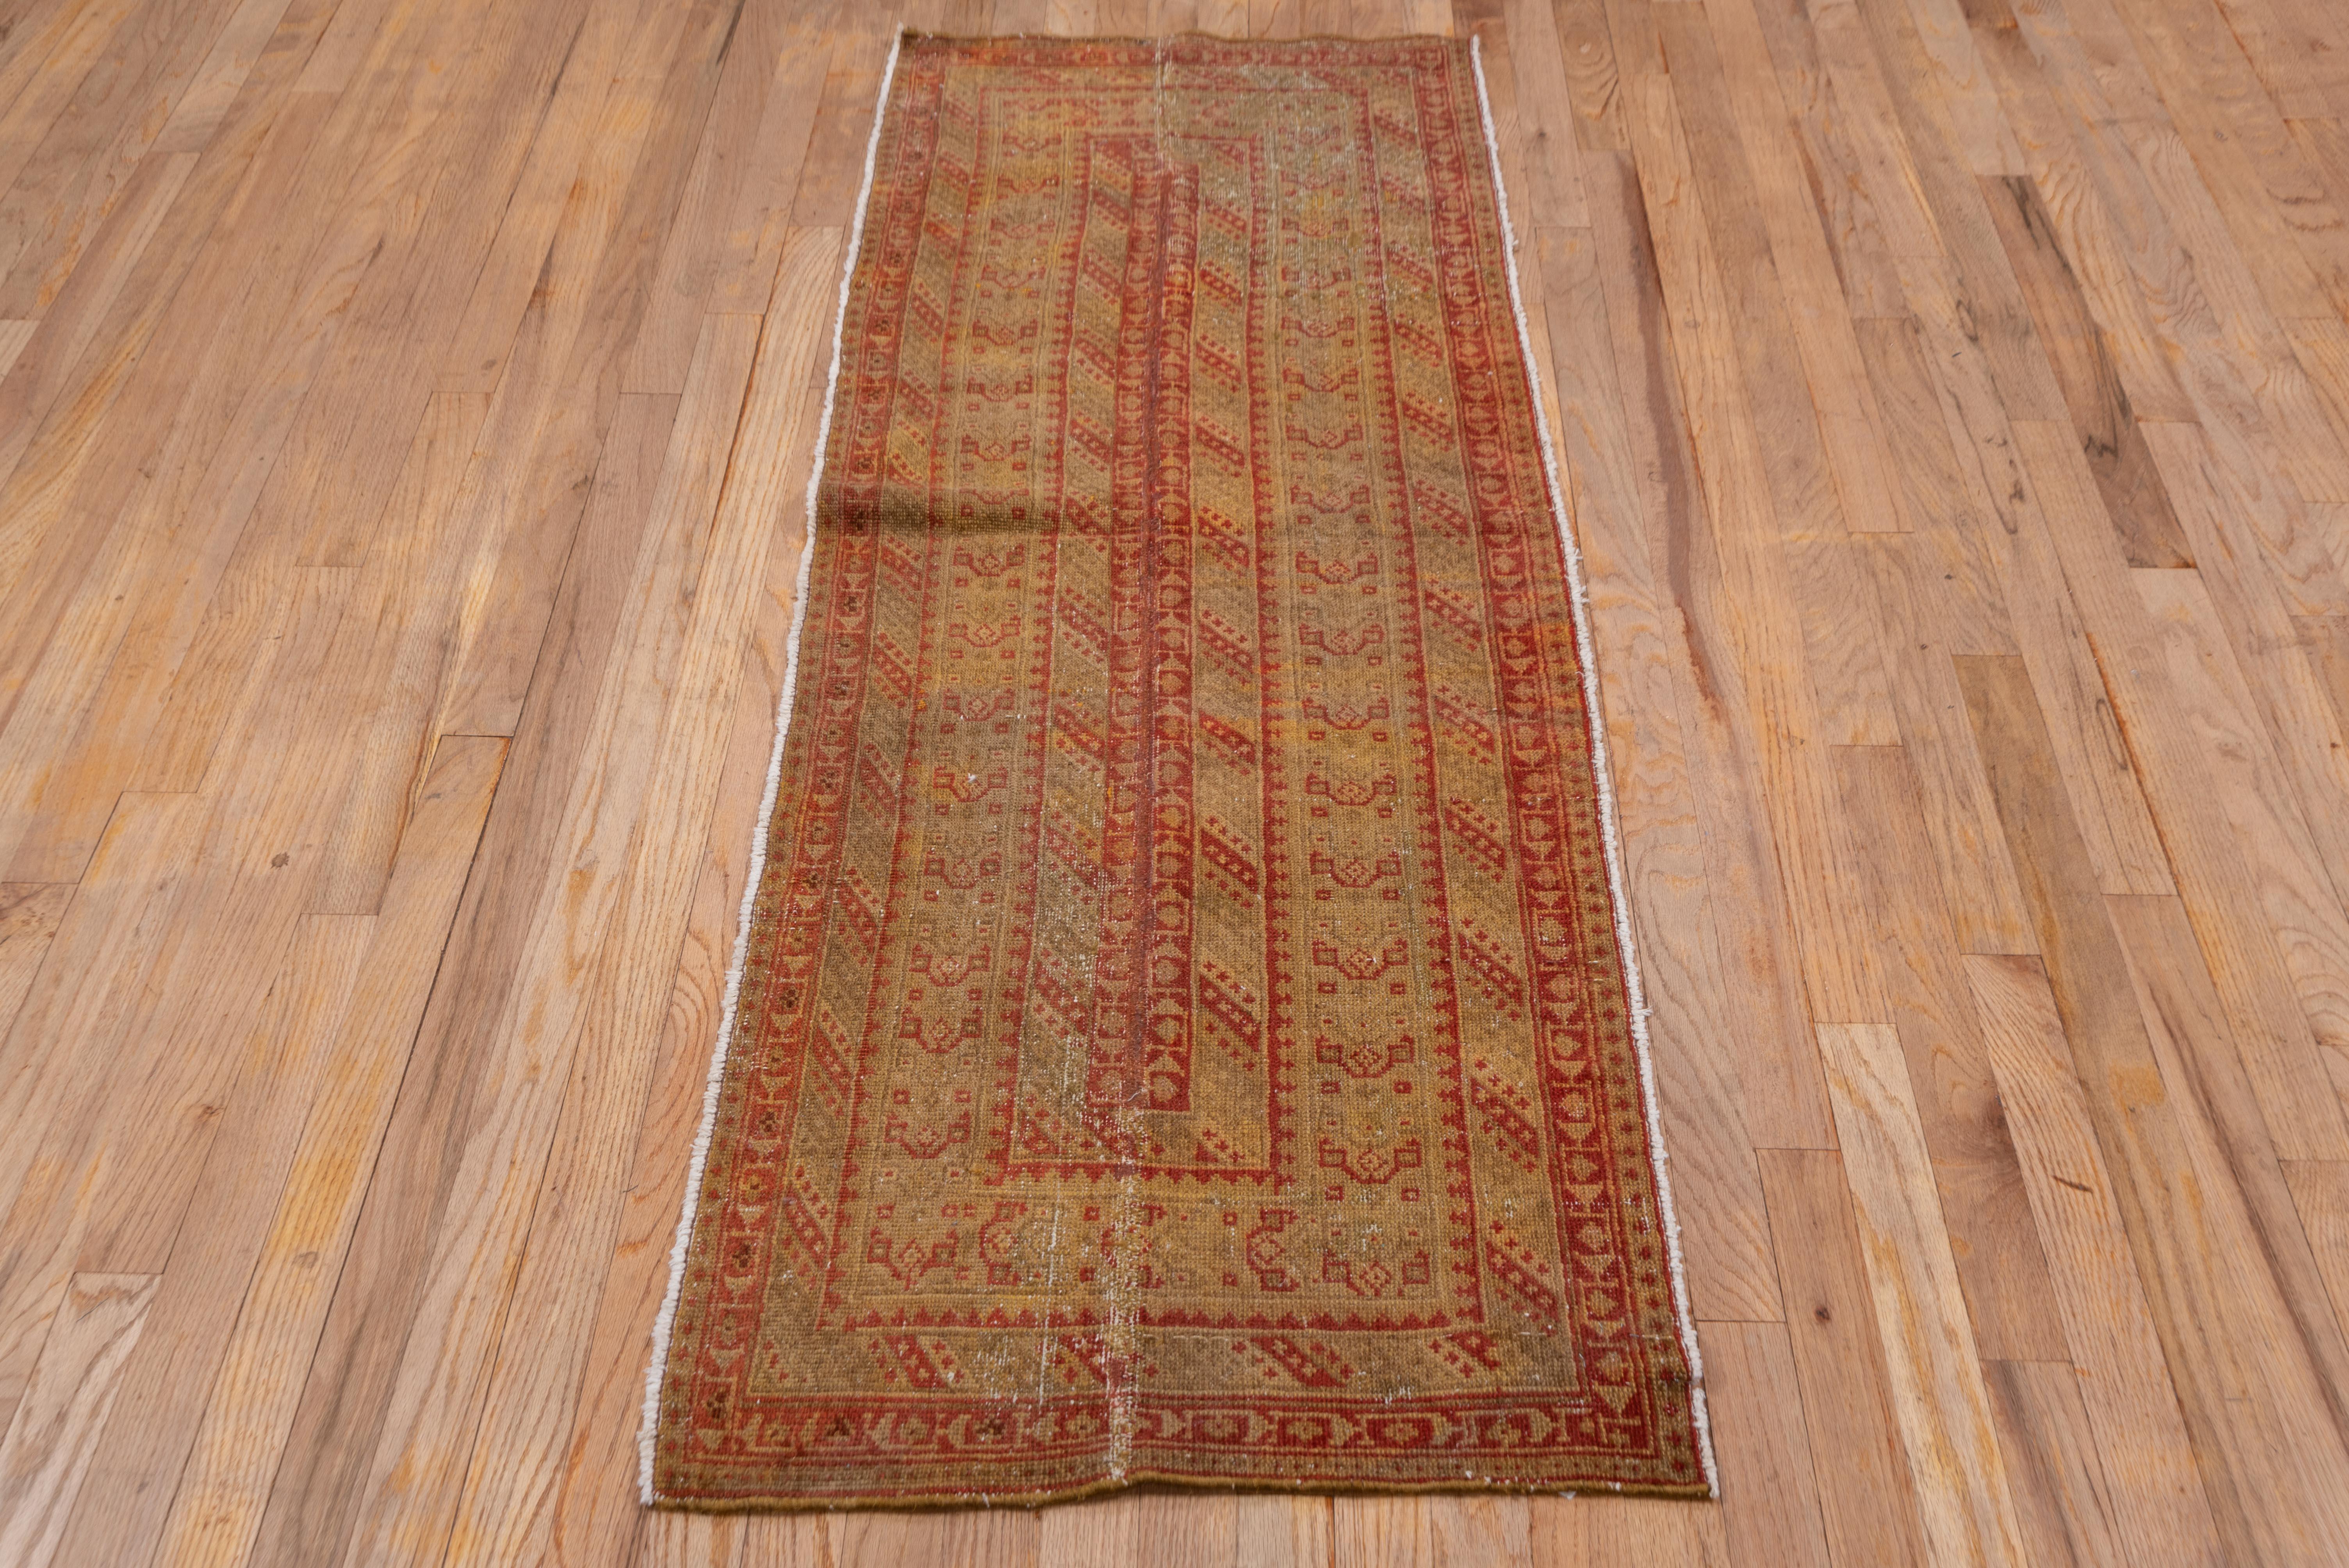 Wool Long Malayer Runner in Golden Orange and Rusted Lemon For Sale